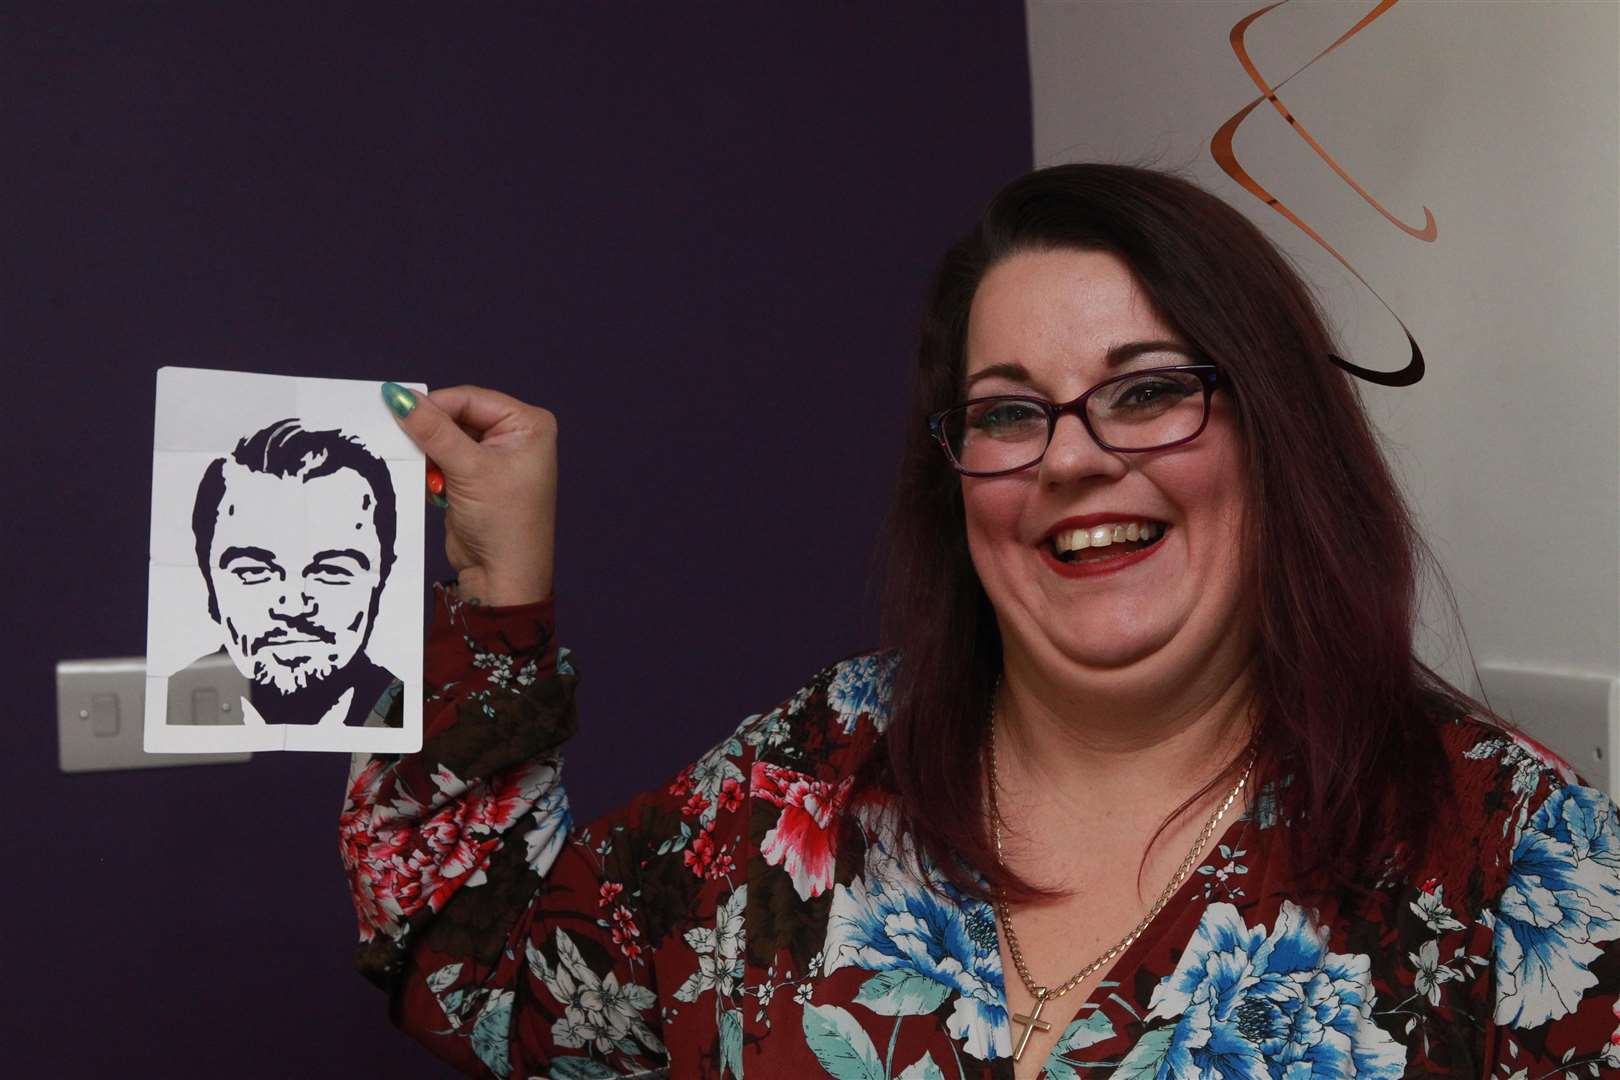 Steff Weller, a Mother and visitor shows a picture of Leonardo DiCaprio, made from origami by Richard Jones winner of Britain's Got Talent, a couple of years ago, he used for a magic trick, during the show children and family at Demelza Hospice Care for Children. Picture by: John Westhrop (5050898)